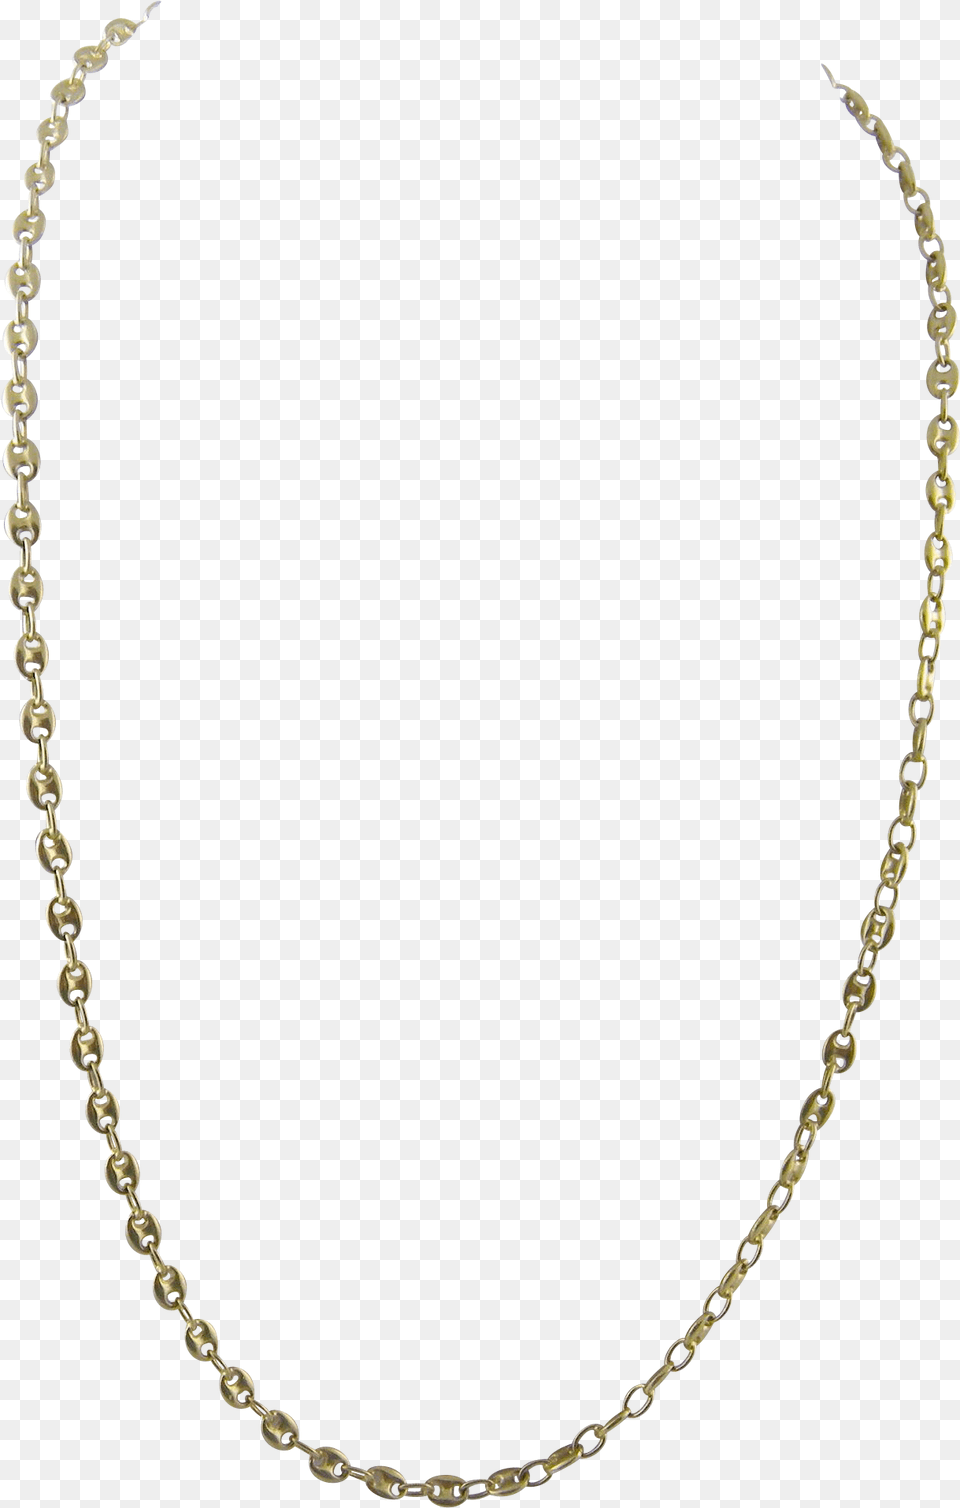 Gucci Chain Dog Tag Chain Gold, Accessories, Jewelry, Necklace Png Image